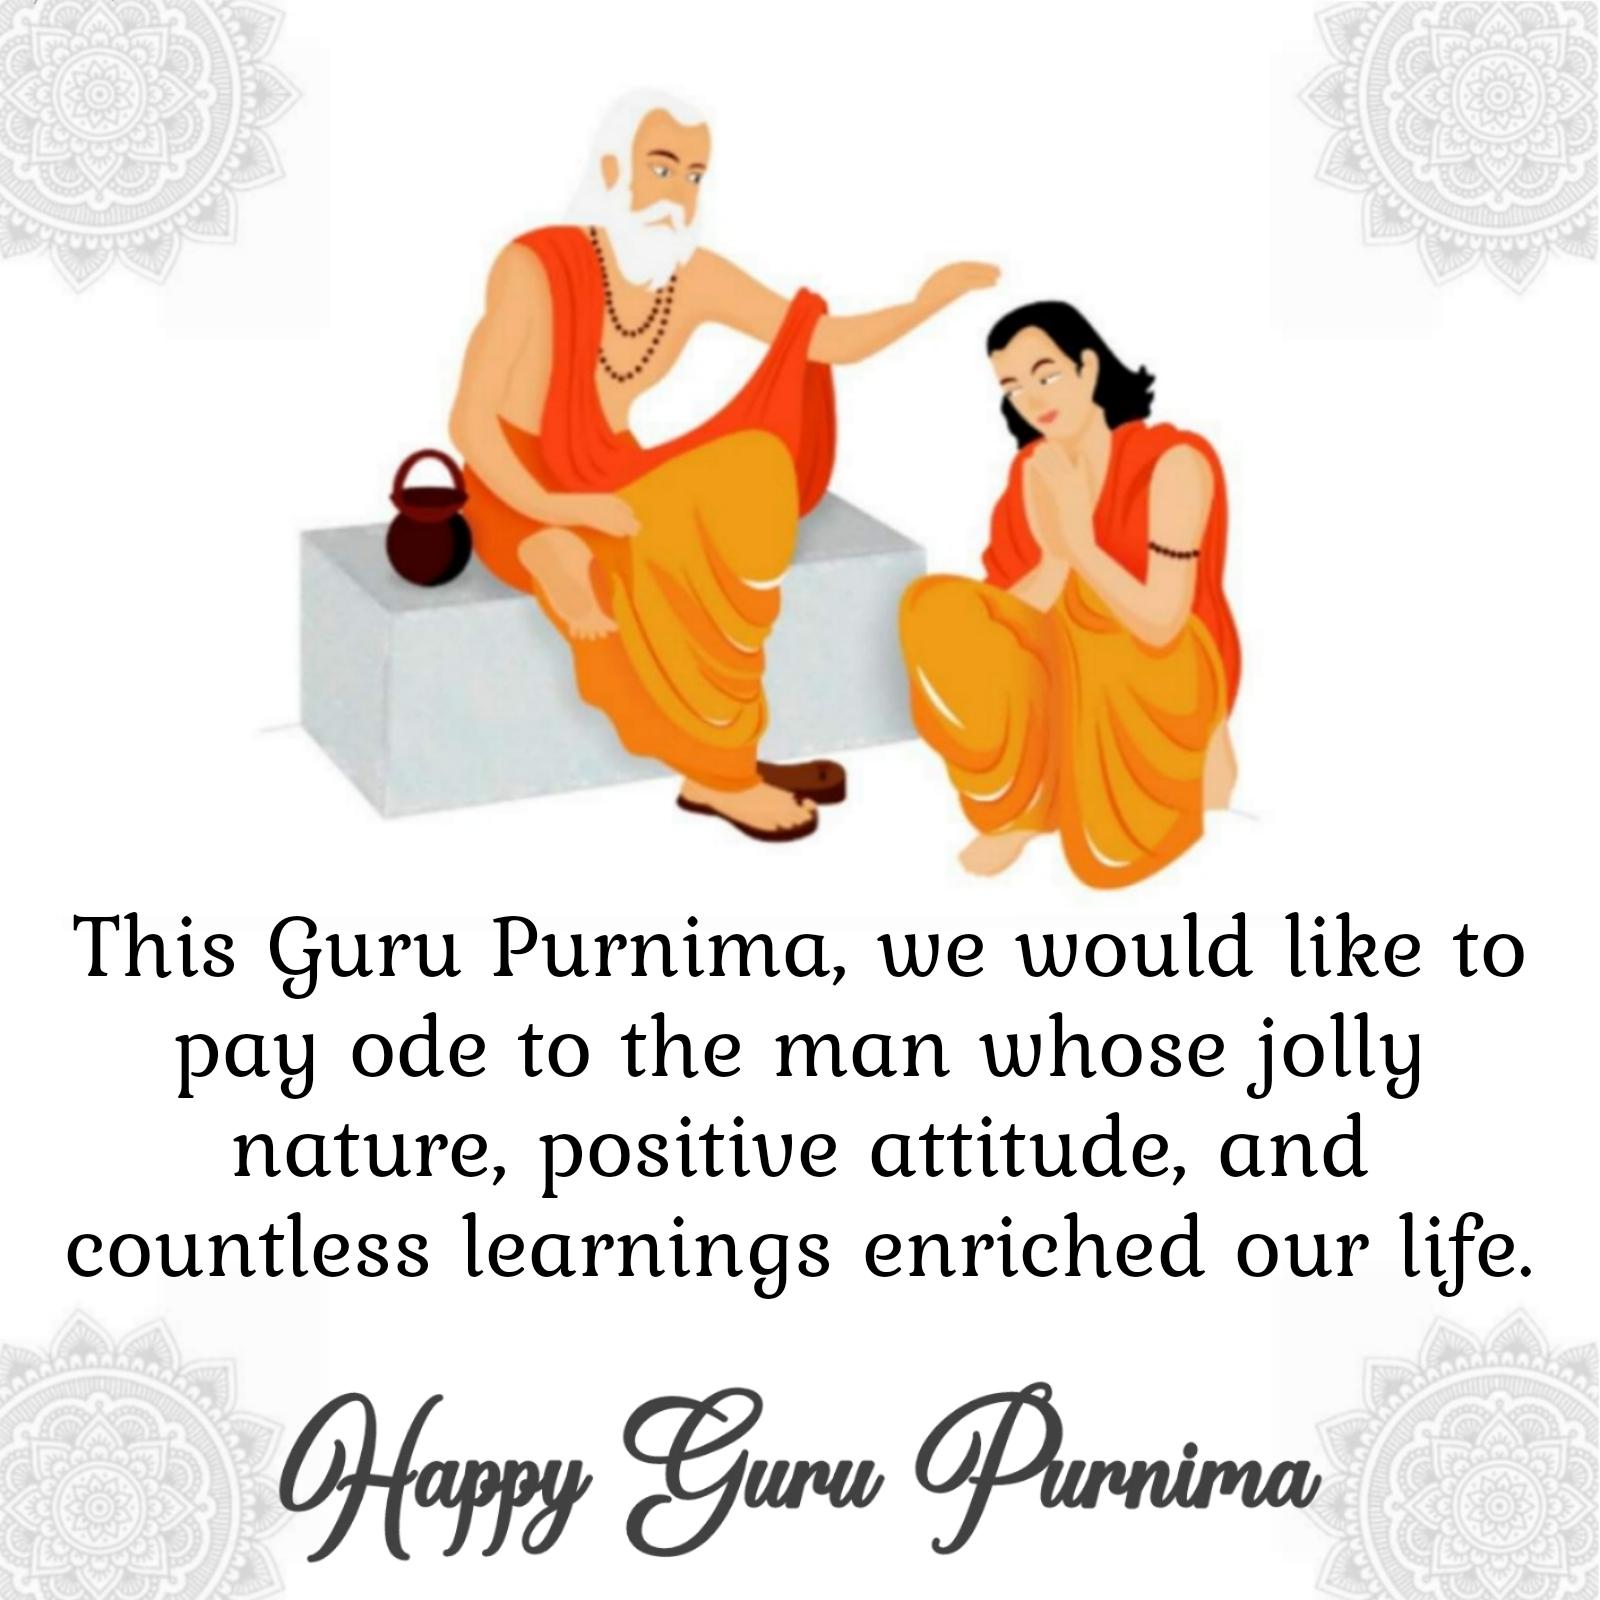 This Guru Purnima we would like to pay ode to the man